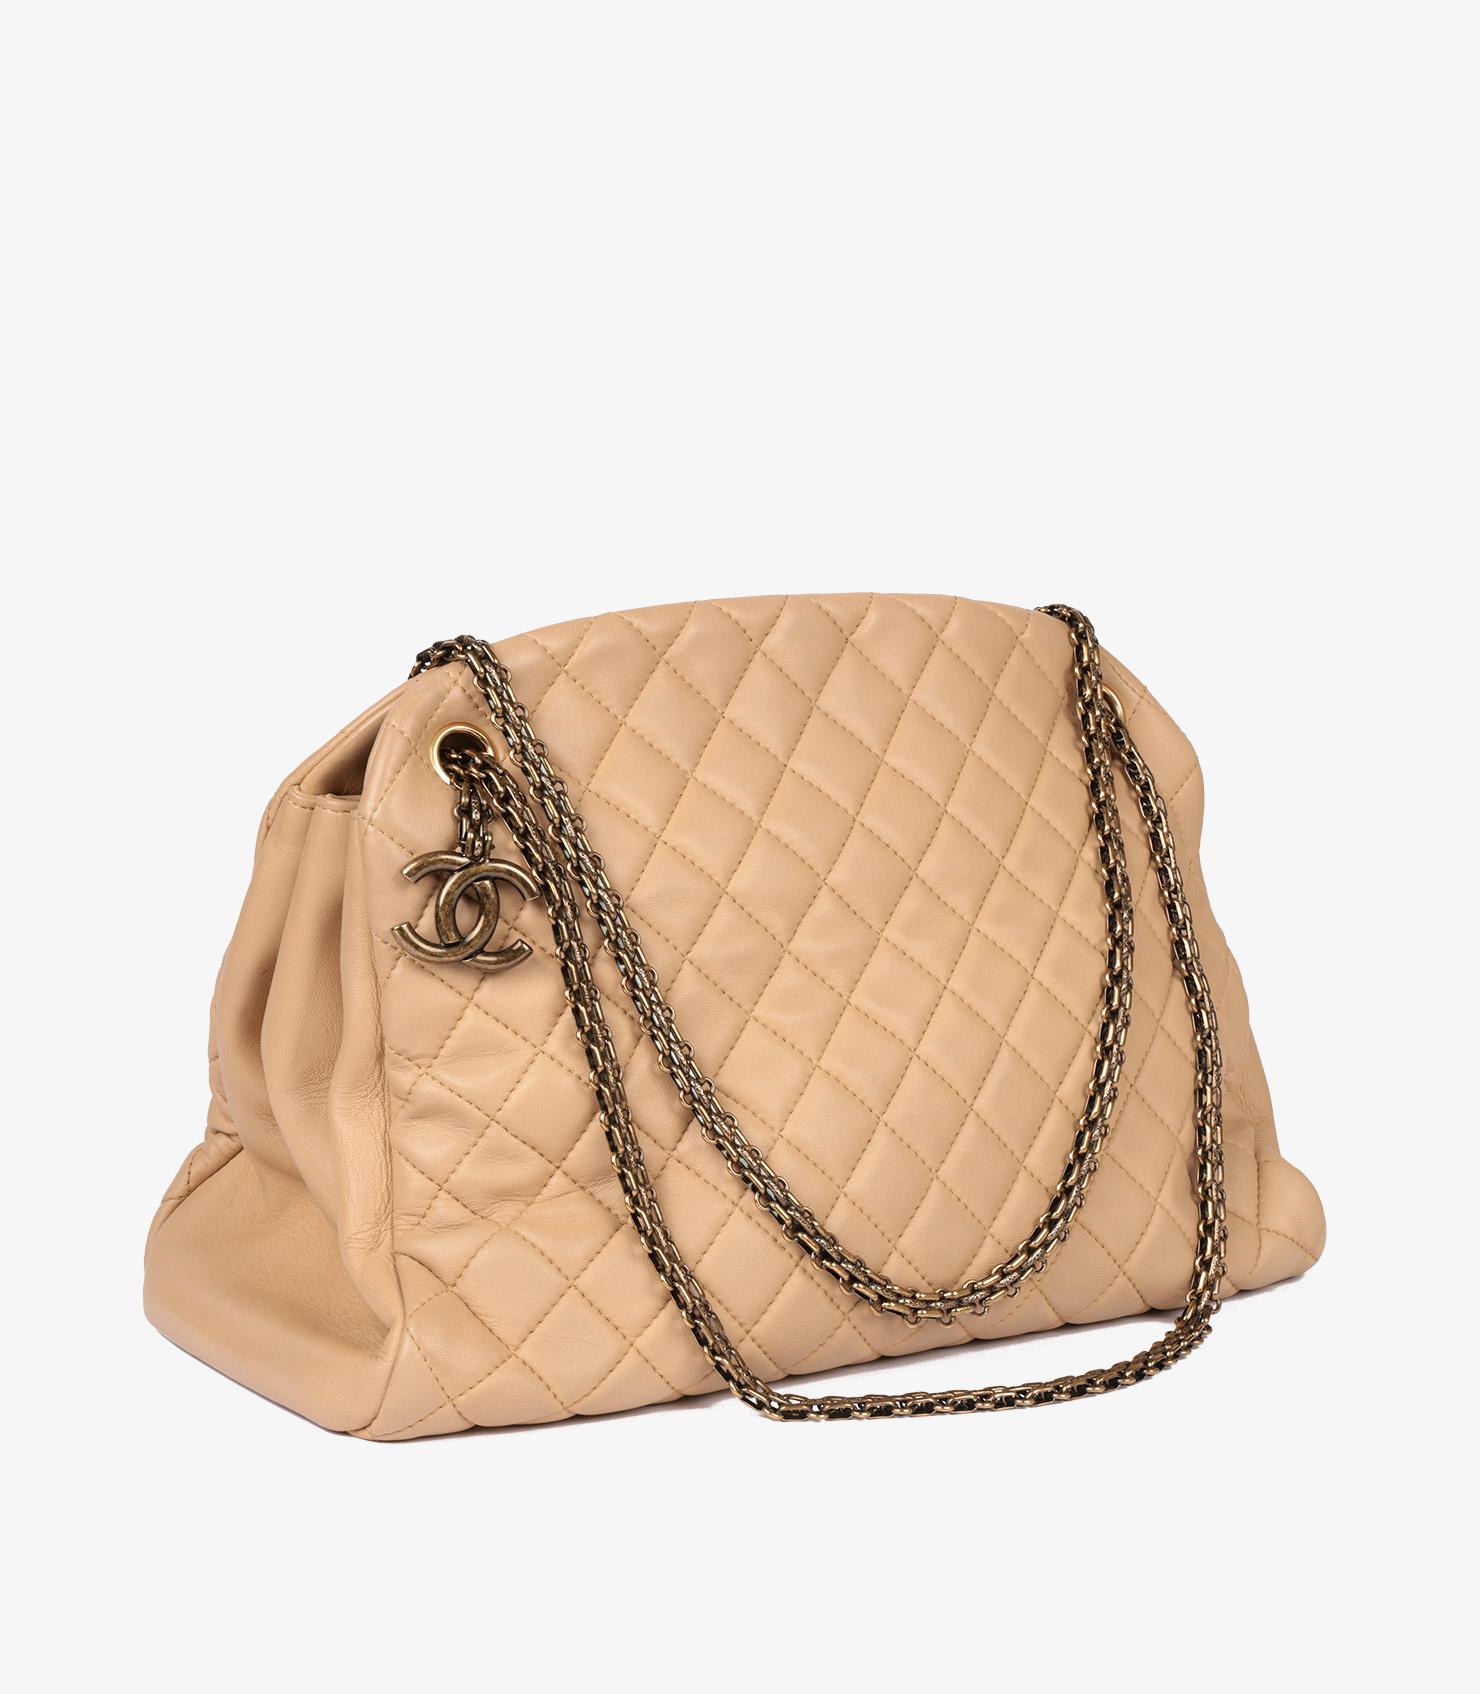 Chanel Beige Quilted Lambskin Large Just Mademoiselle Bowling Bag In Excellent Condition For Sale In Bishop's Stortford, Hertfordshire